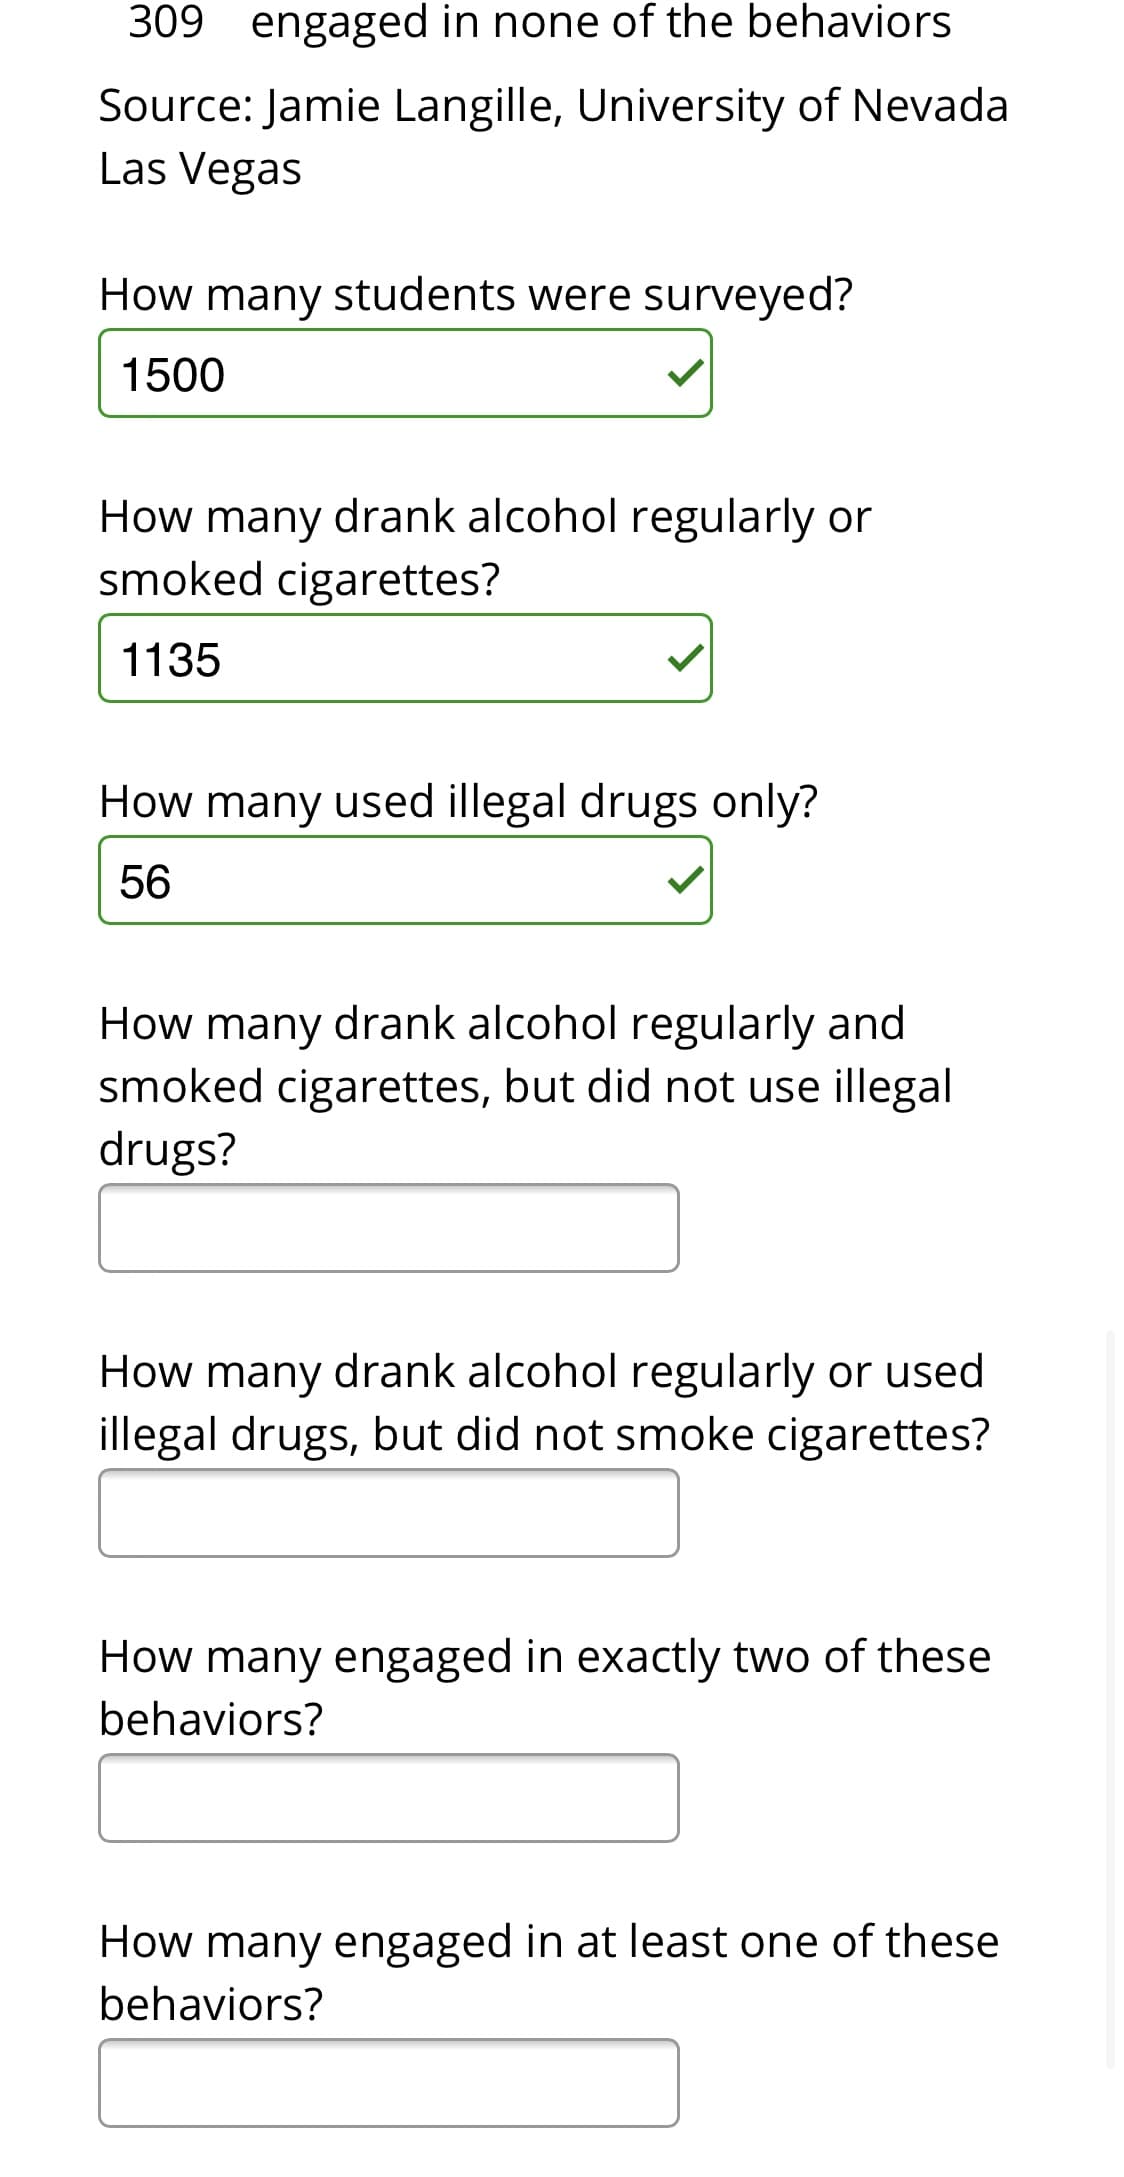 309 engaged in none of the behaviors
Source: Jamie Langille, University of Nevada
Las Vegas
How many students were surveyed?
1500
How many drank alcohol regularly or
smoked cigarettes?
1135
How many used illegal drugs only?
56
How many drank alcohol regularly and
smoked cigarettes, but did not use illegal
drugs?
How many drank alcohol regularly or used
illegal drugs, but did not smoke cigarettes?
How many engaged in exactly two of these
behaviors?
How many engaged in at least one of these
behaviors?
